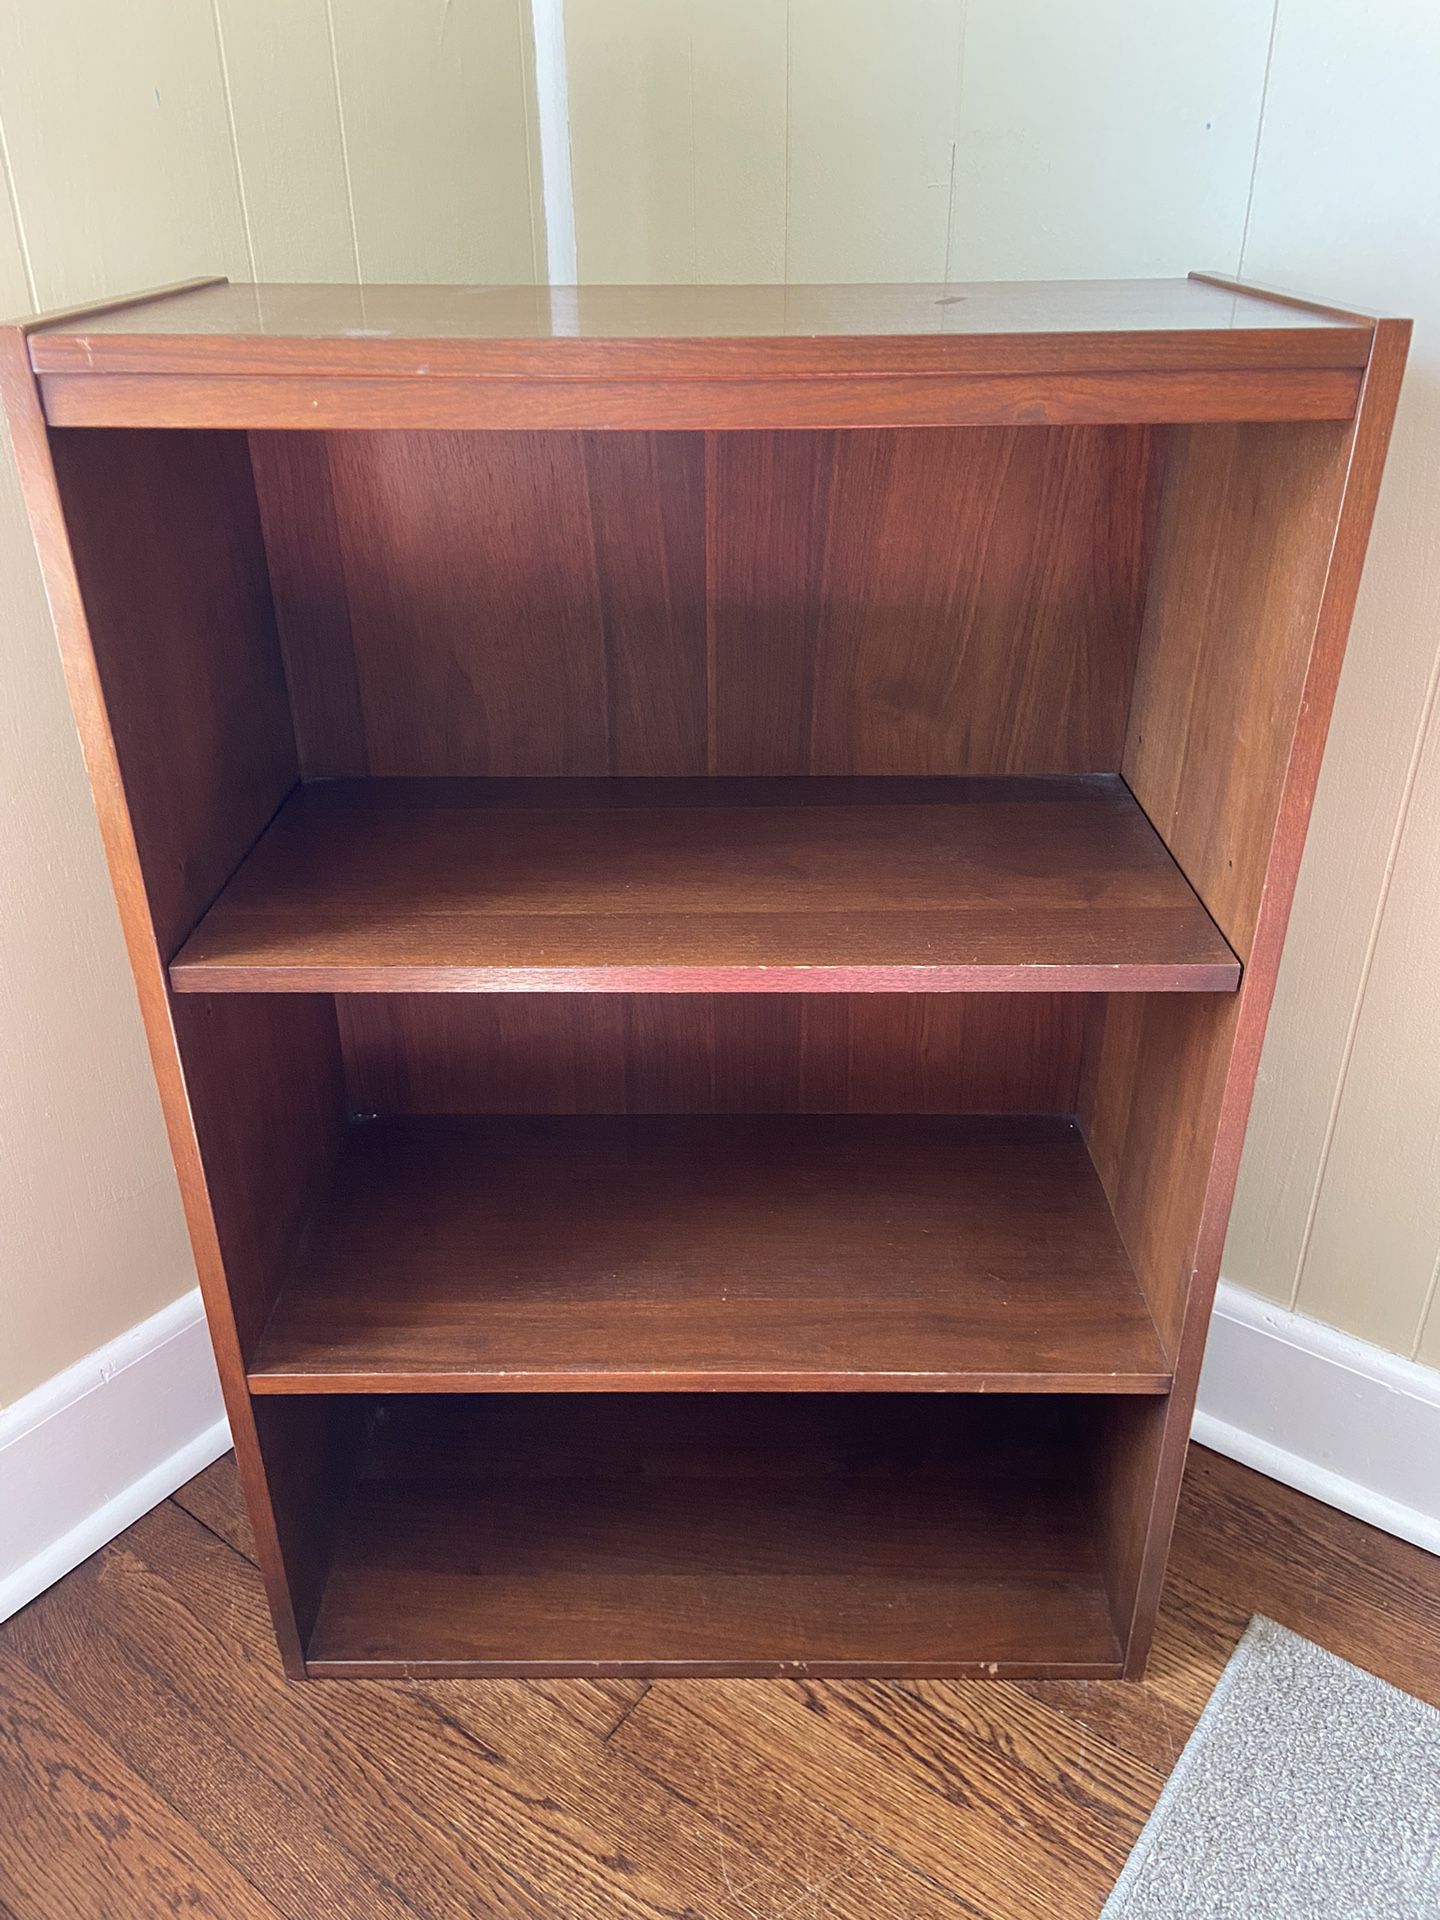 Two Bookshelves (27x39x12 inches)